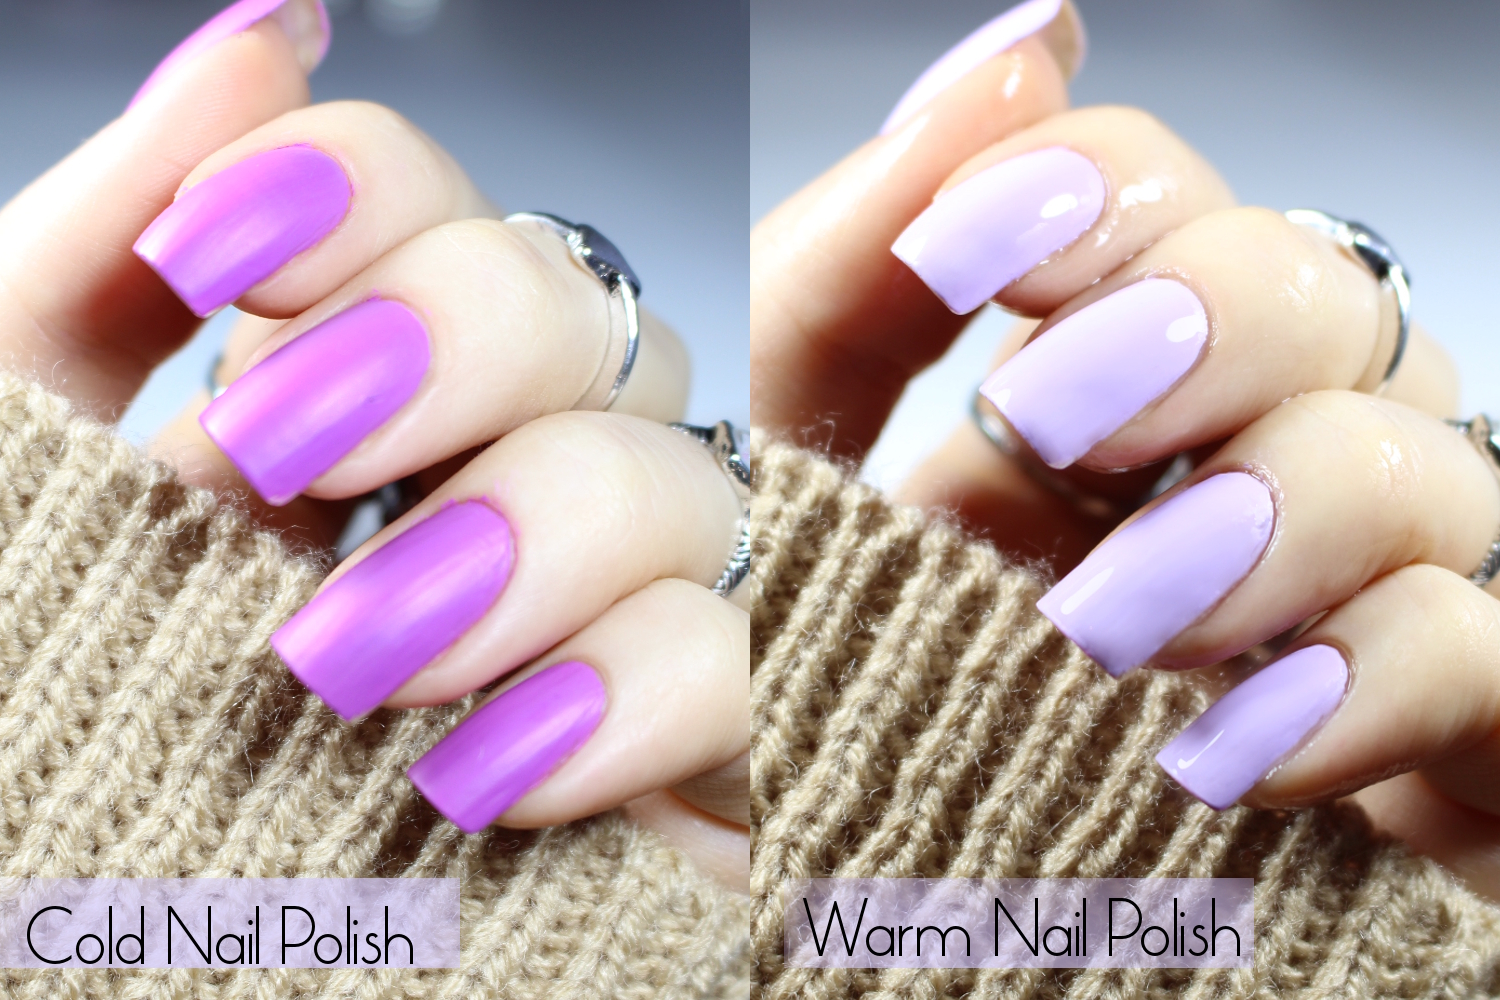 blogger Liz Breygel demonstrates her manicure with before and after results of color-changing nail polish